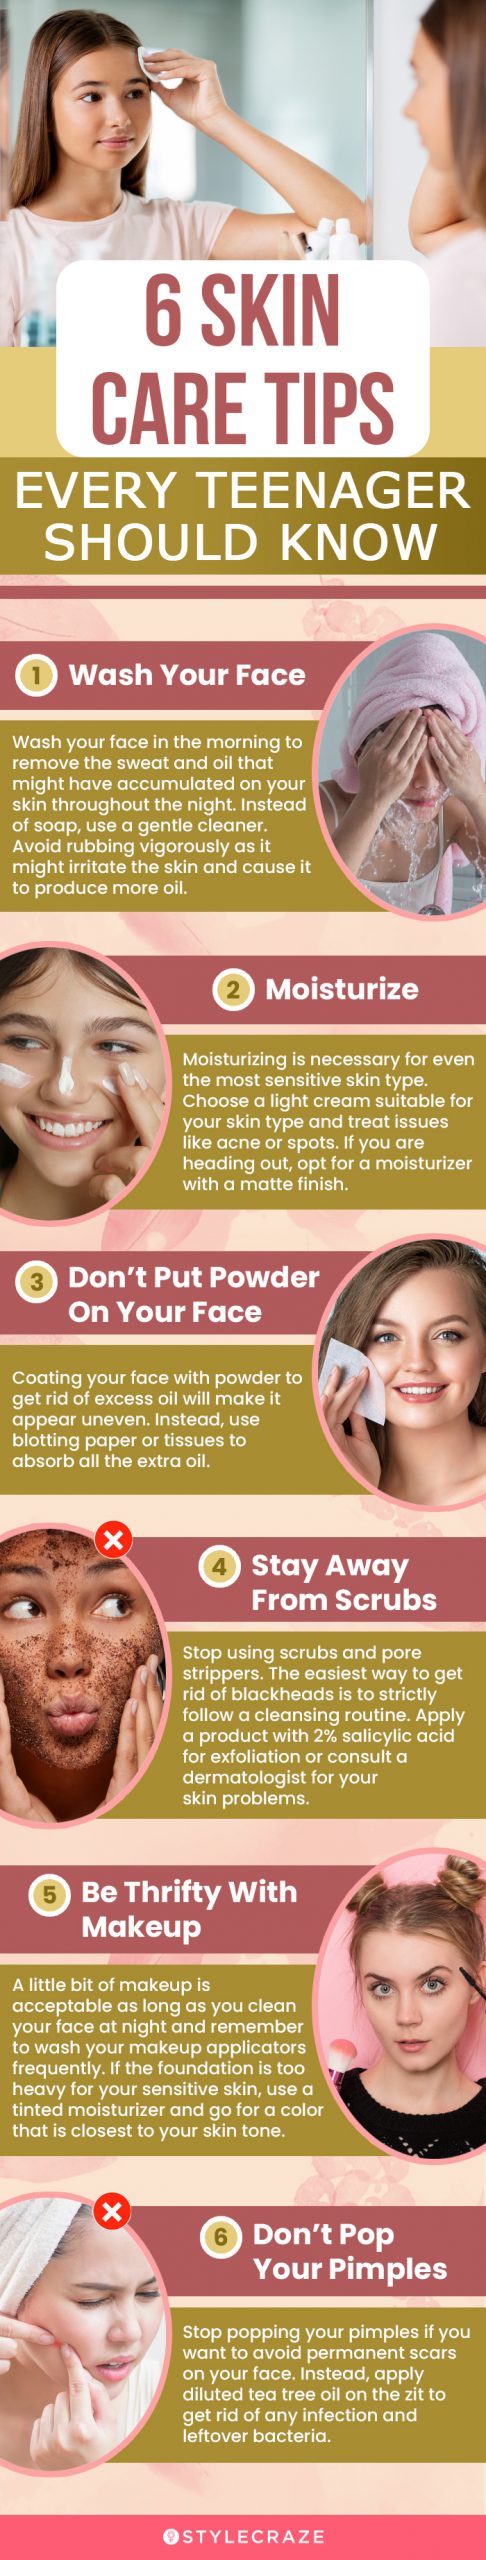 6 skin care tips every teenager should know(infographic)